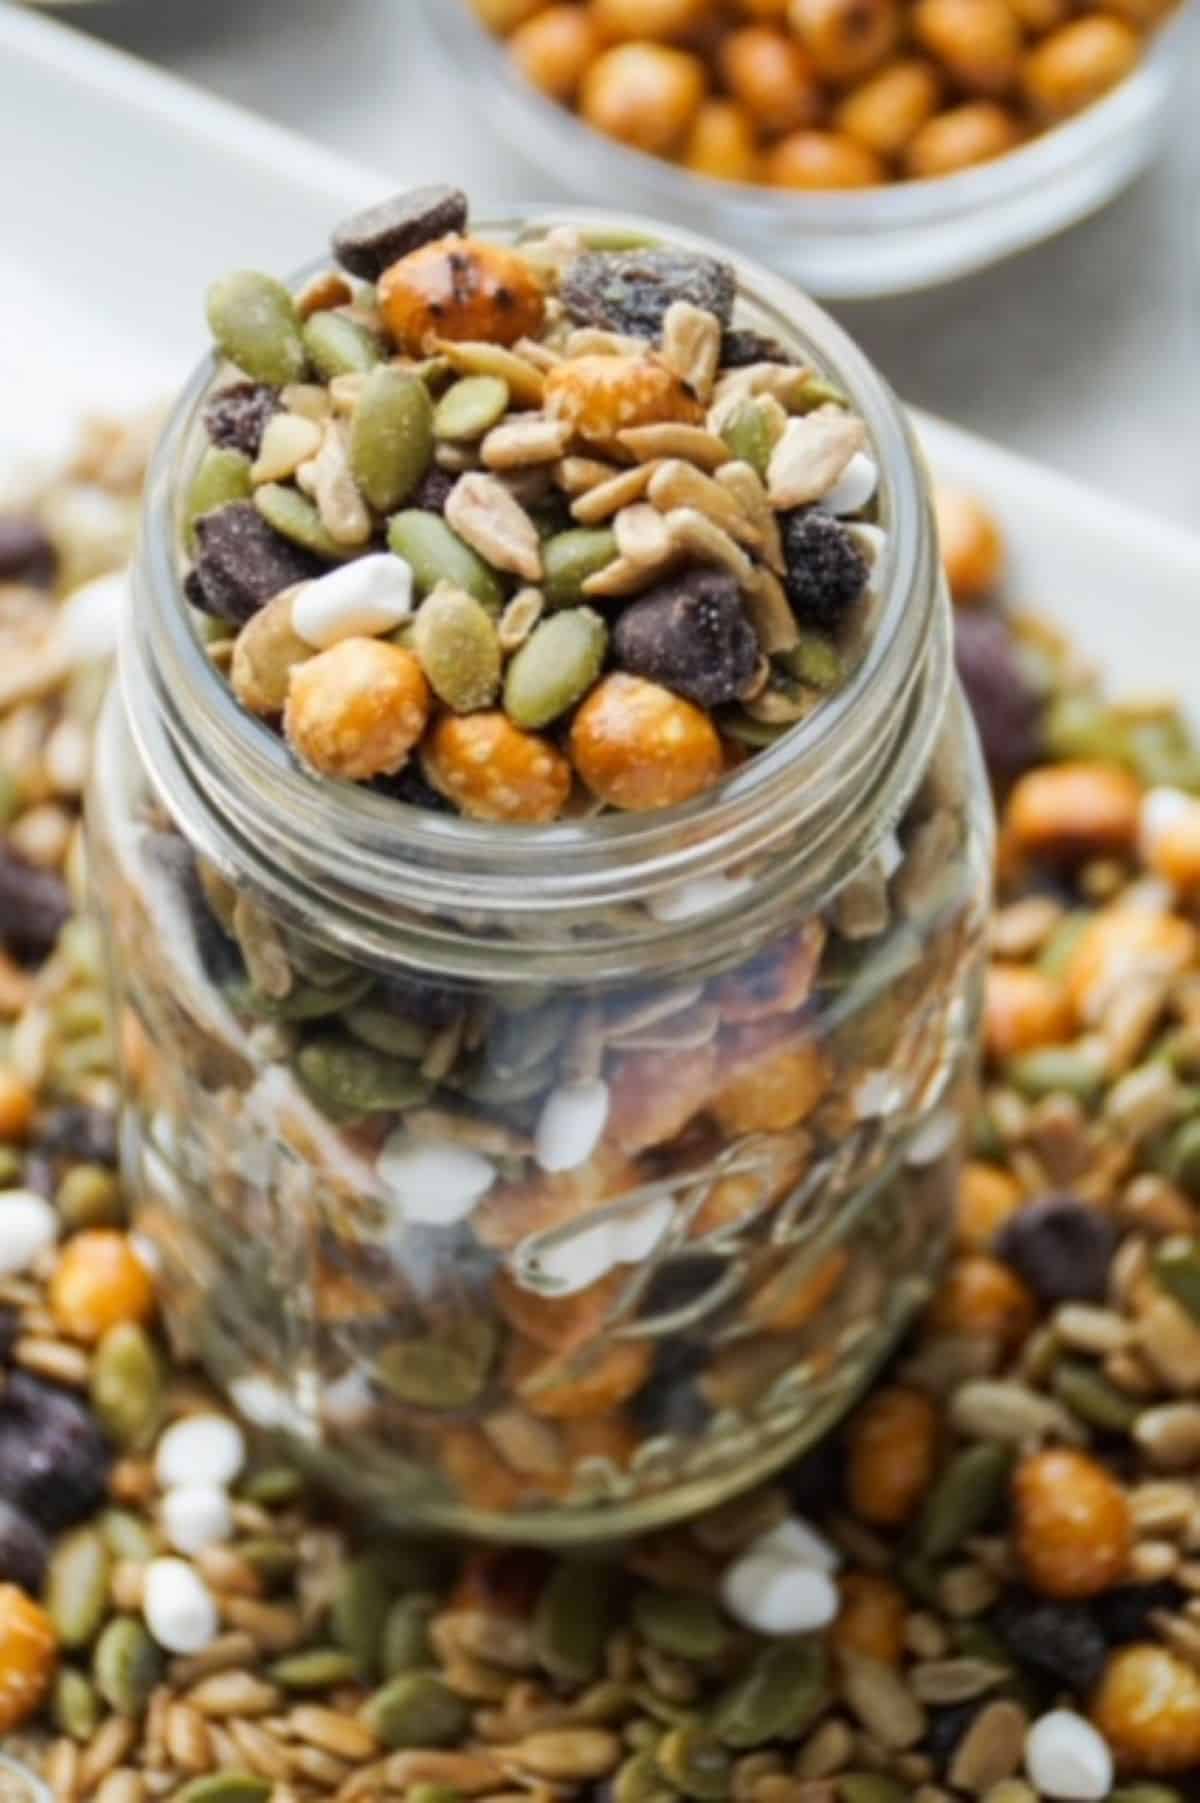 One glass mason jar filled with peanut-free trail mix. Base of jar surrounded by trail mix on a white plate. White bowl with pretzel balls partially pictured in the background.